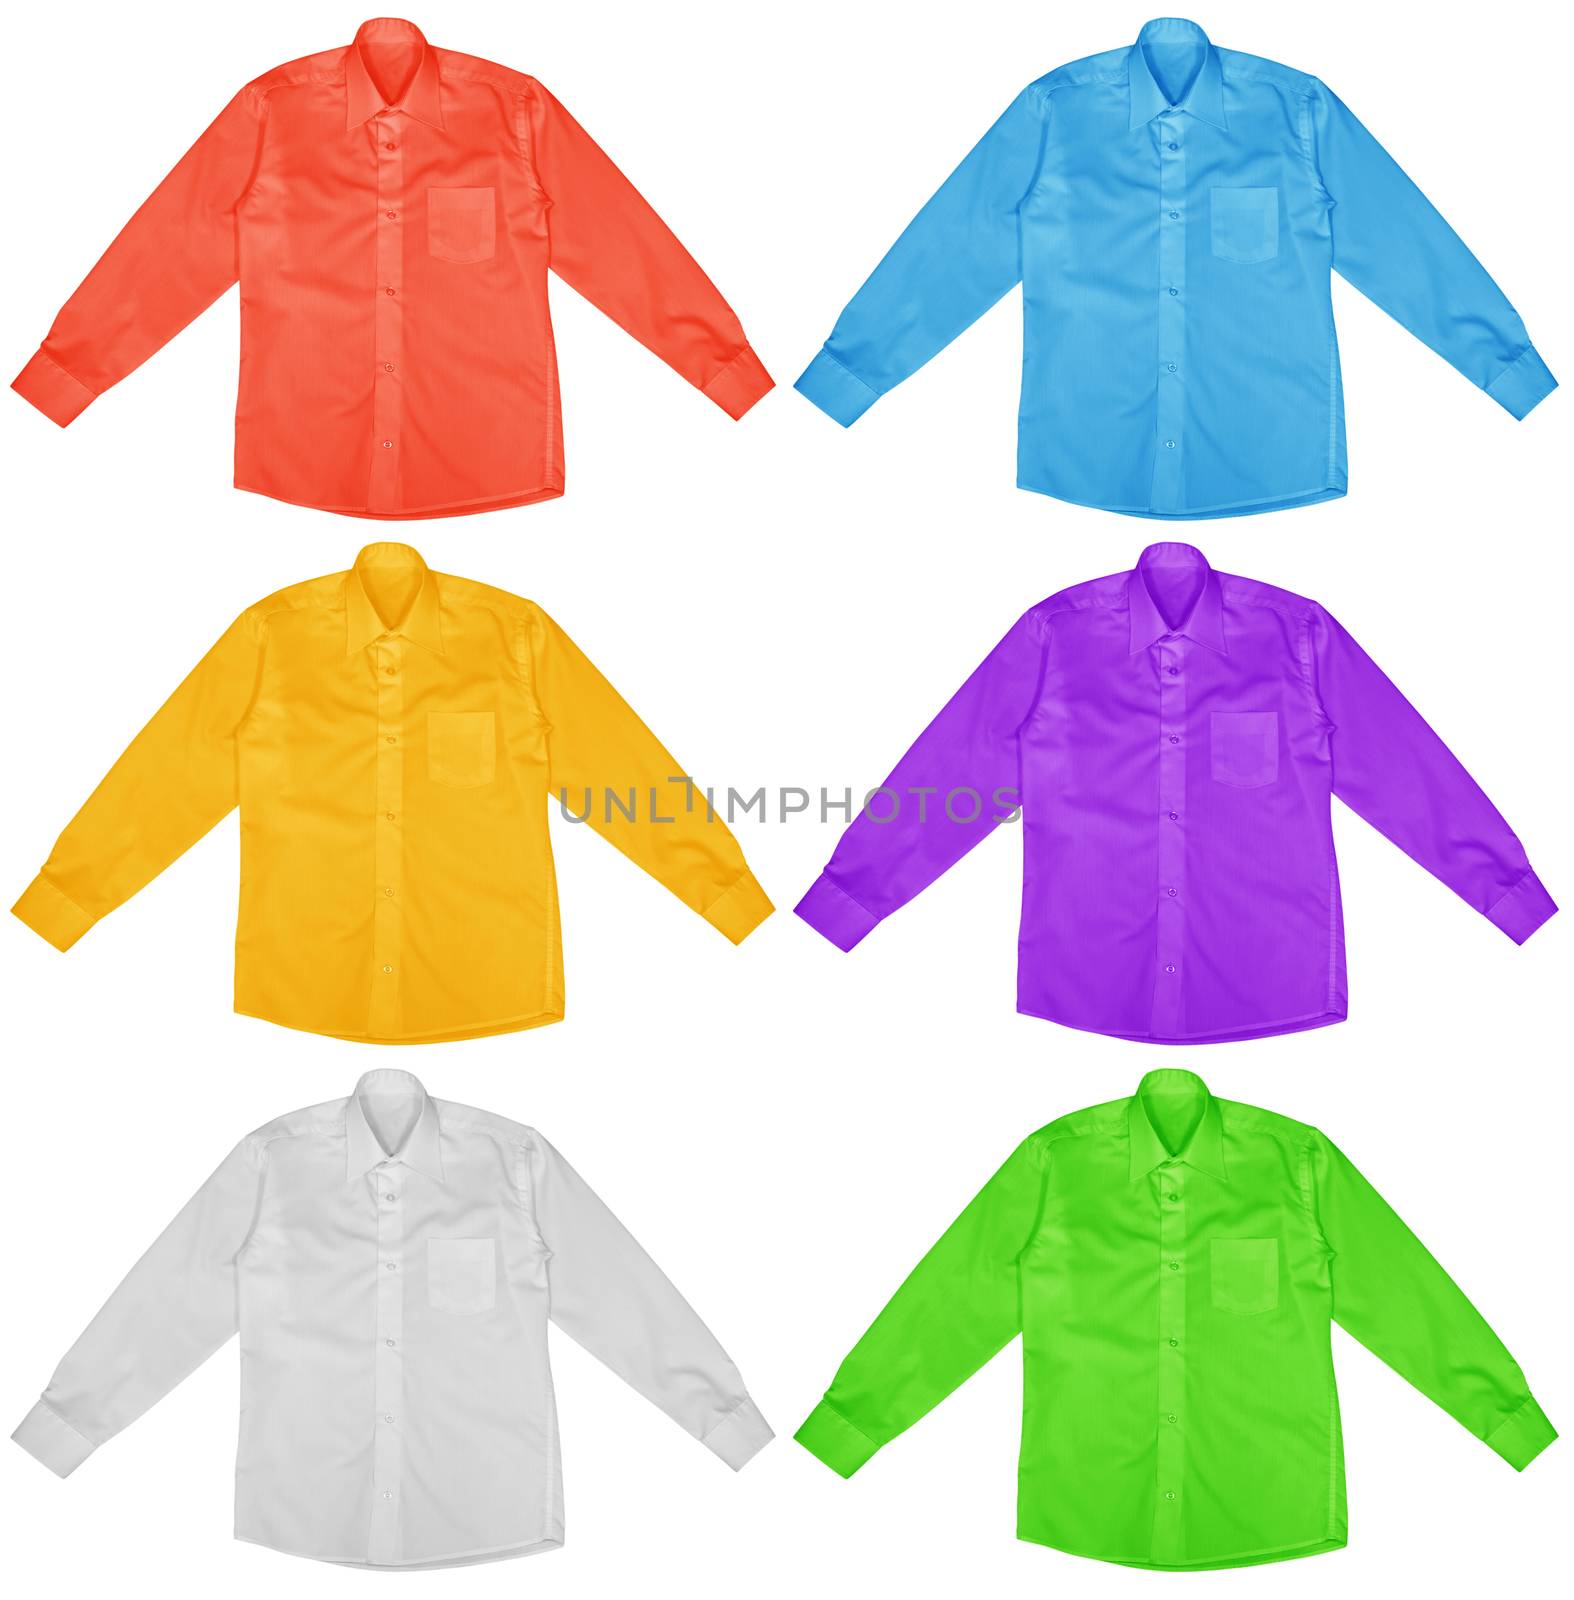 Colorful shirts with long sleeves by Venakr